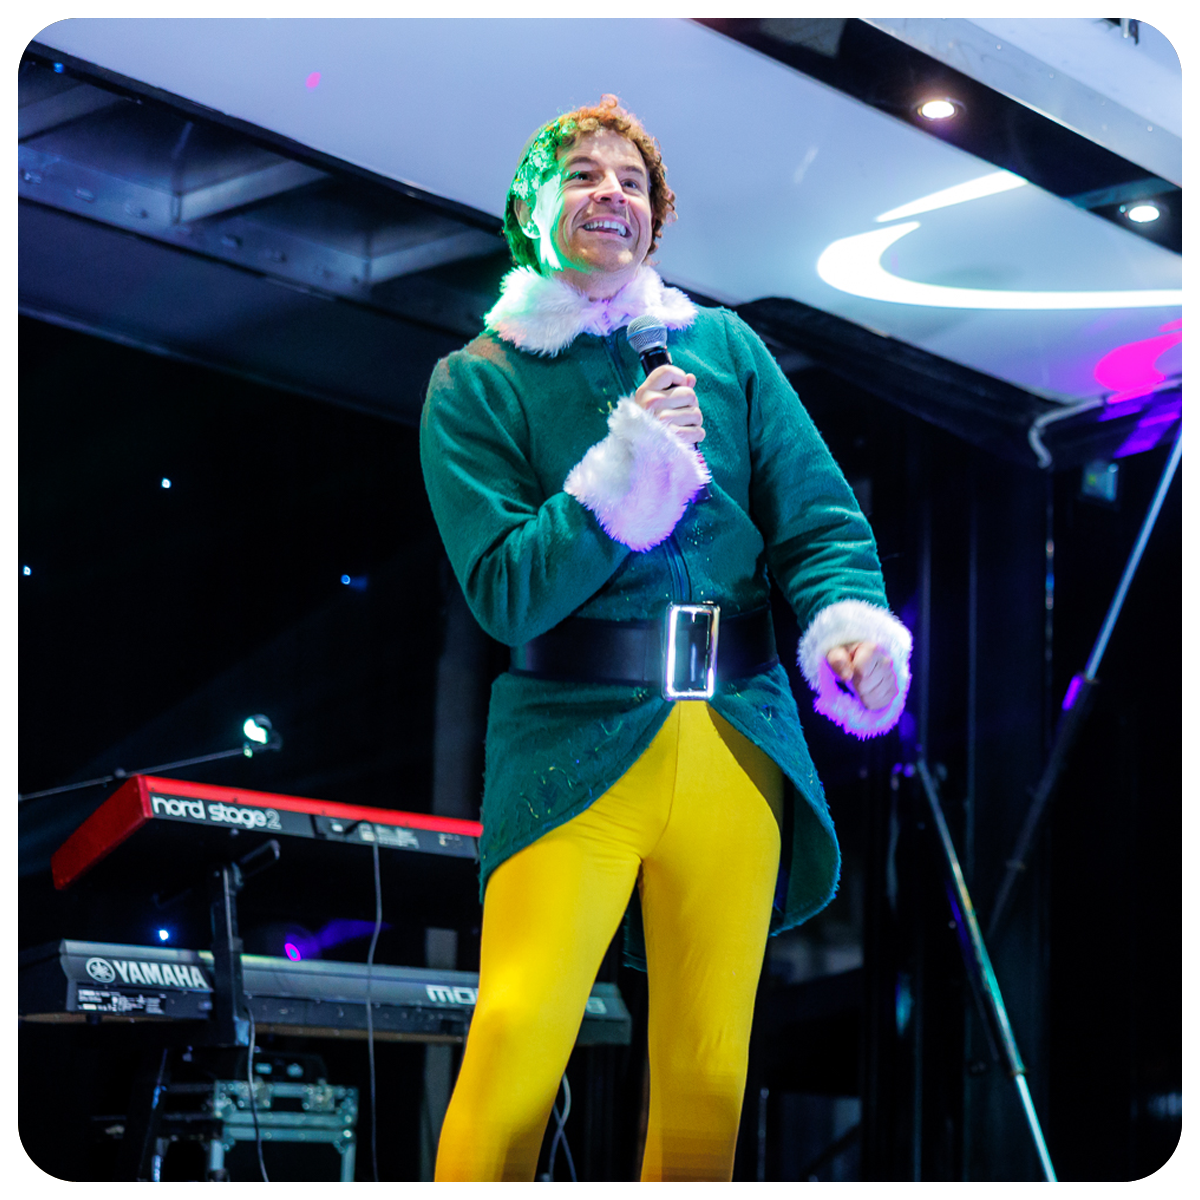 Buddy the Elf at Christmas Light Switch On event